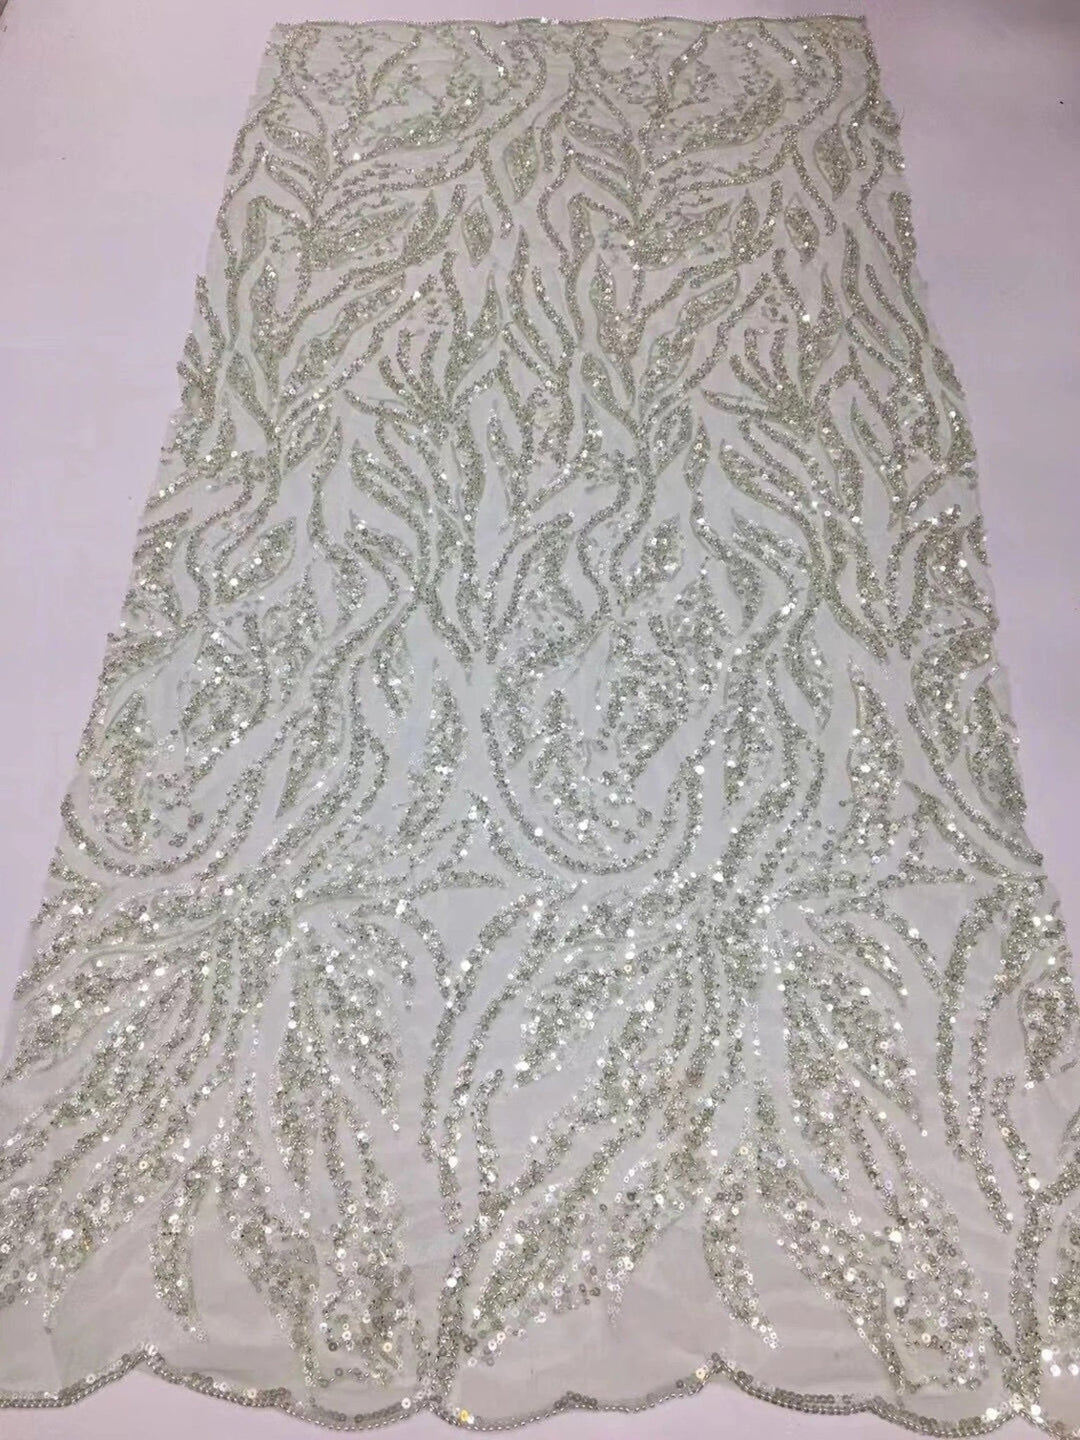 5 YARDS / 9 COLORS / Abstract Geometric Embroidery Mesh Lace / Dress Fabric - Classic & Modern